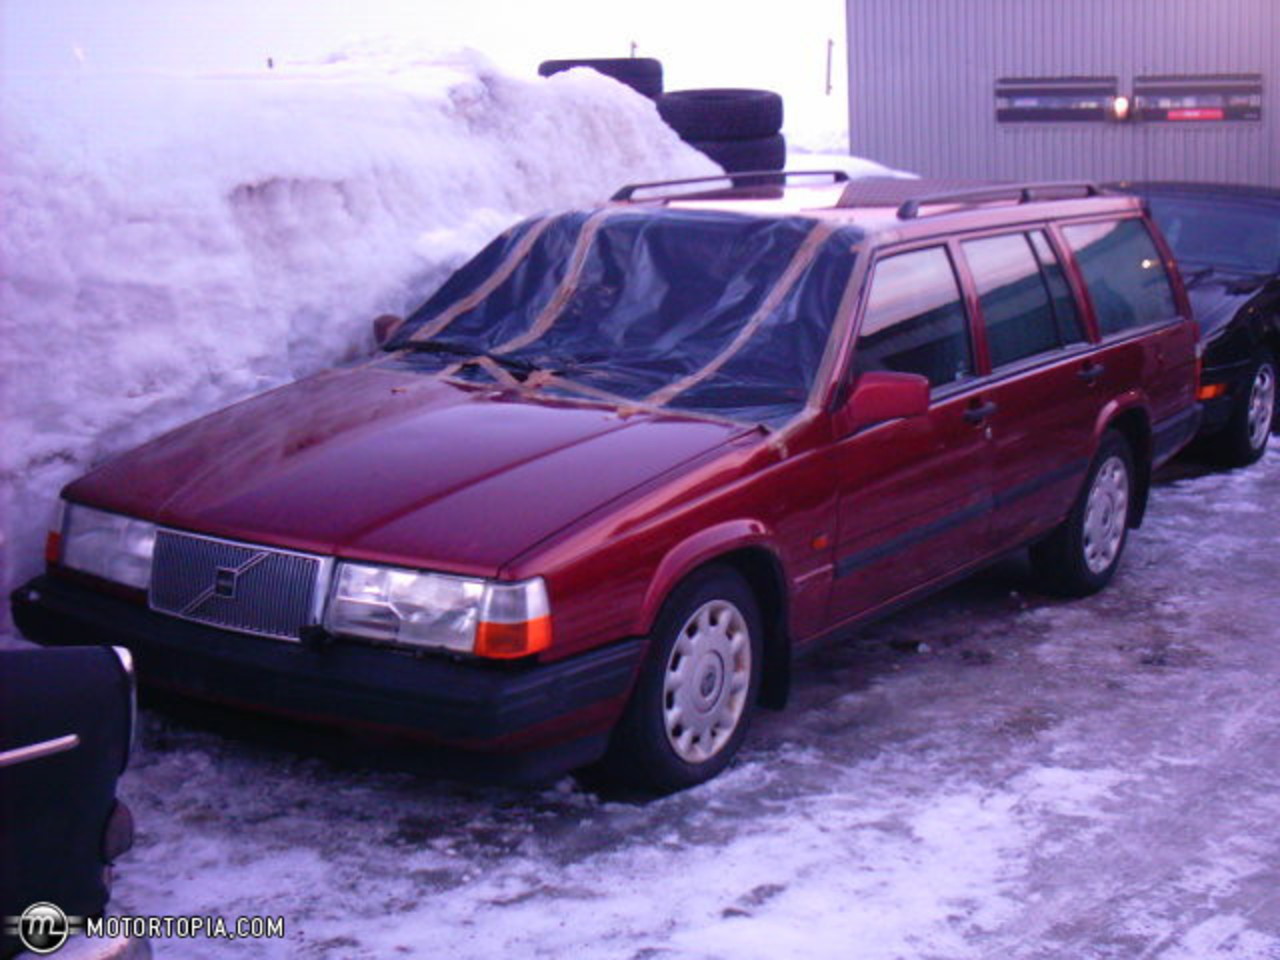 Photo of a 1994 volvo 945 GL (THE ELK=)). 568 views; comment; forward car